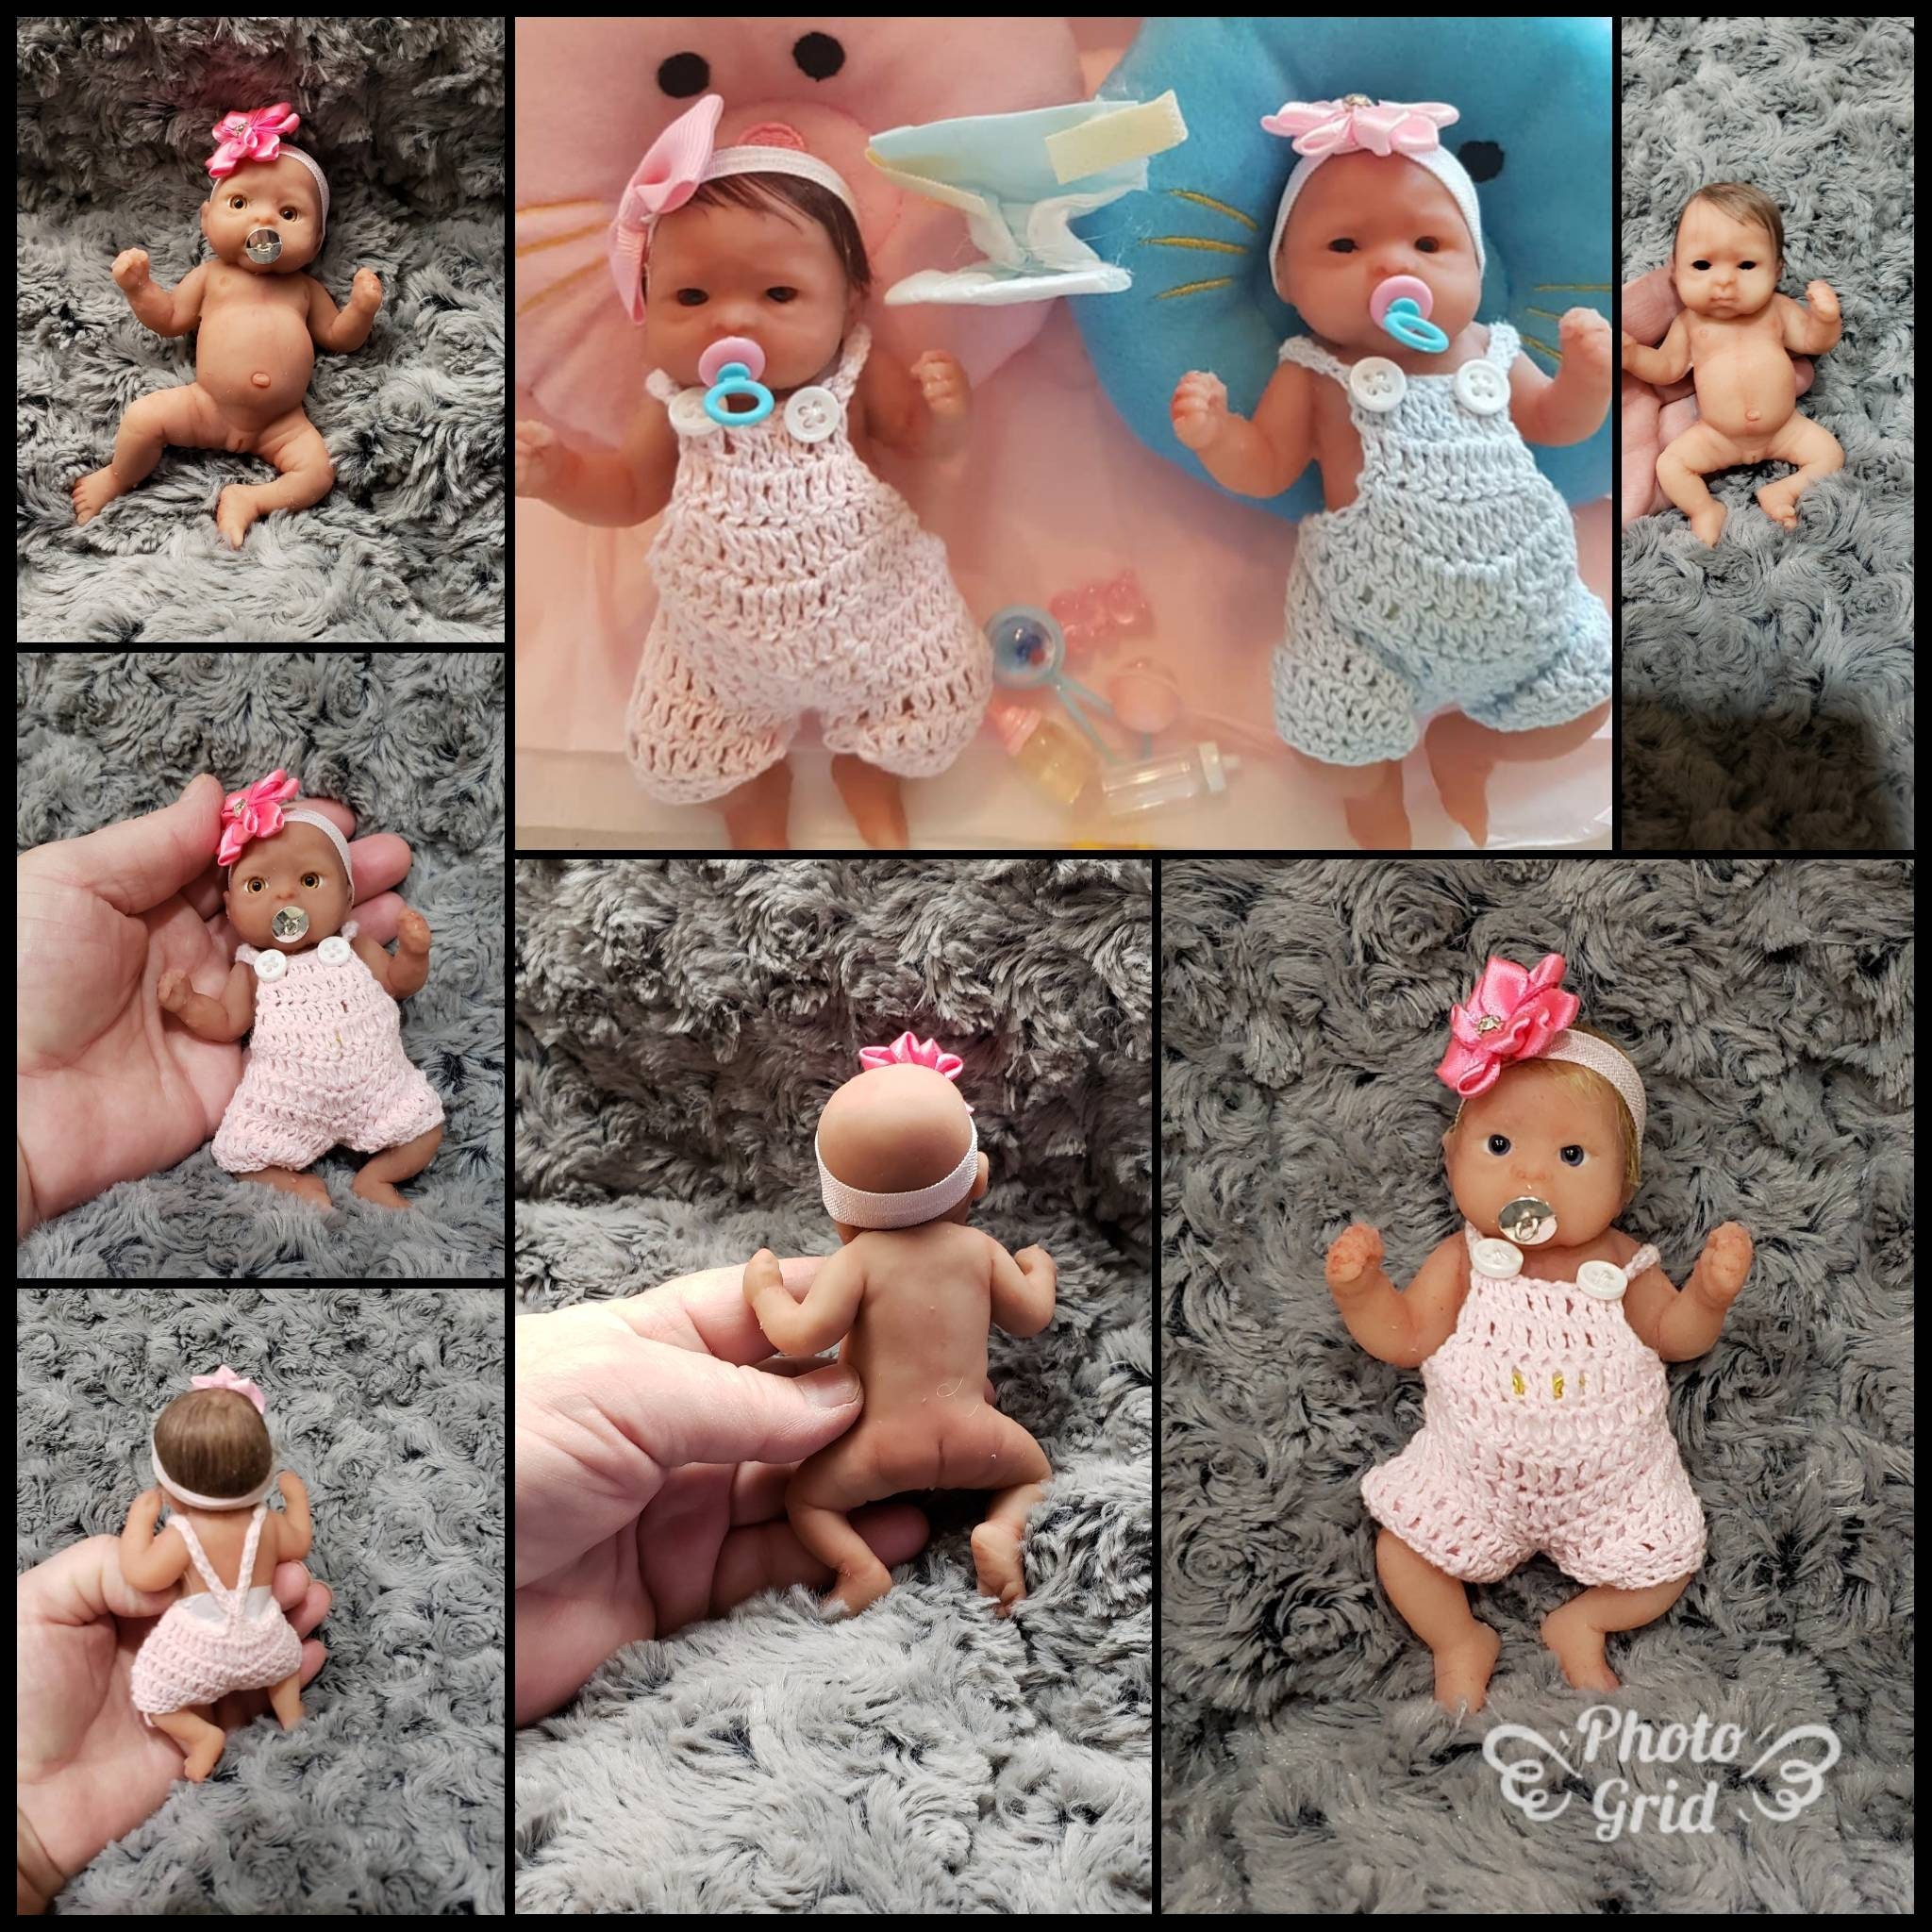 New My Mini Baby 5 Surprise, with 12 sets to collect! Which one is you, Silicone Doll